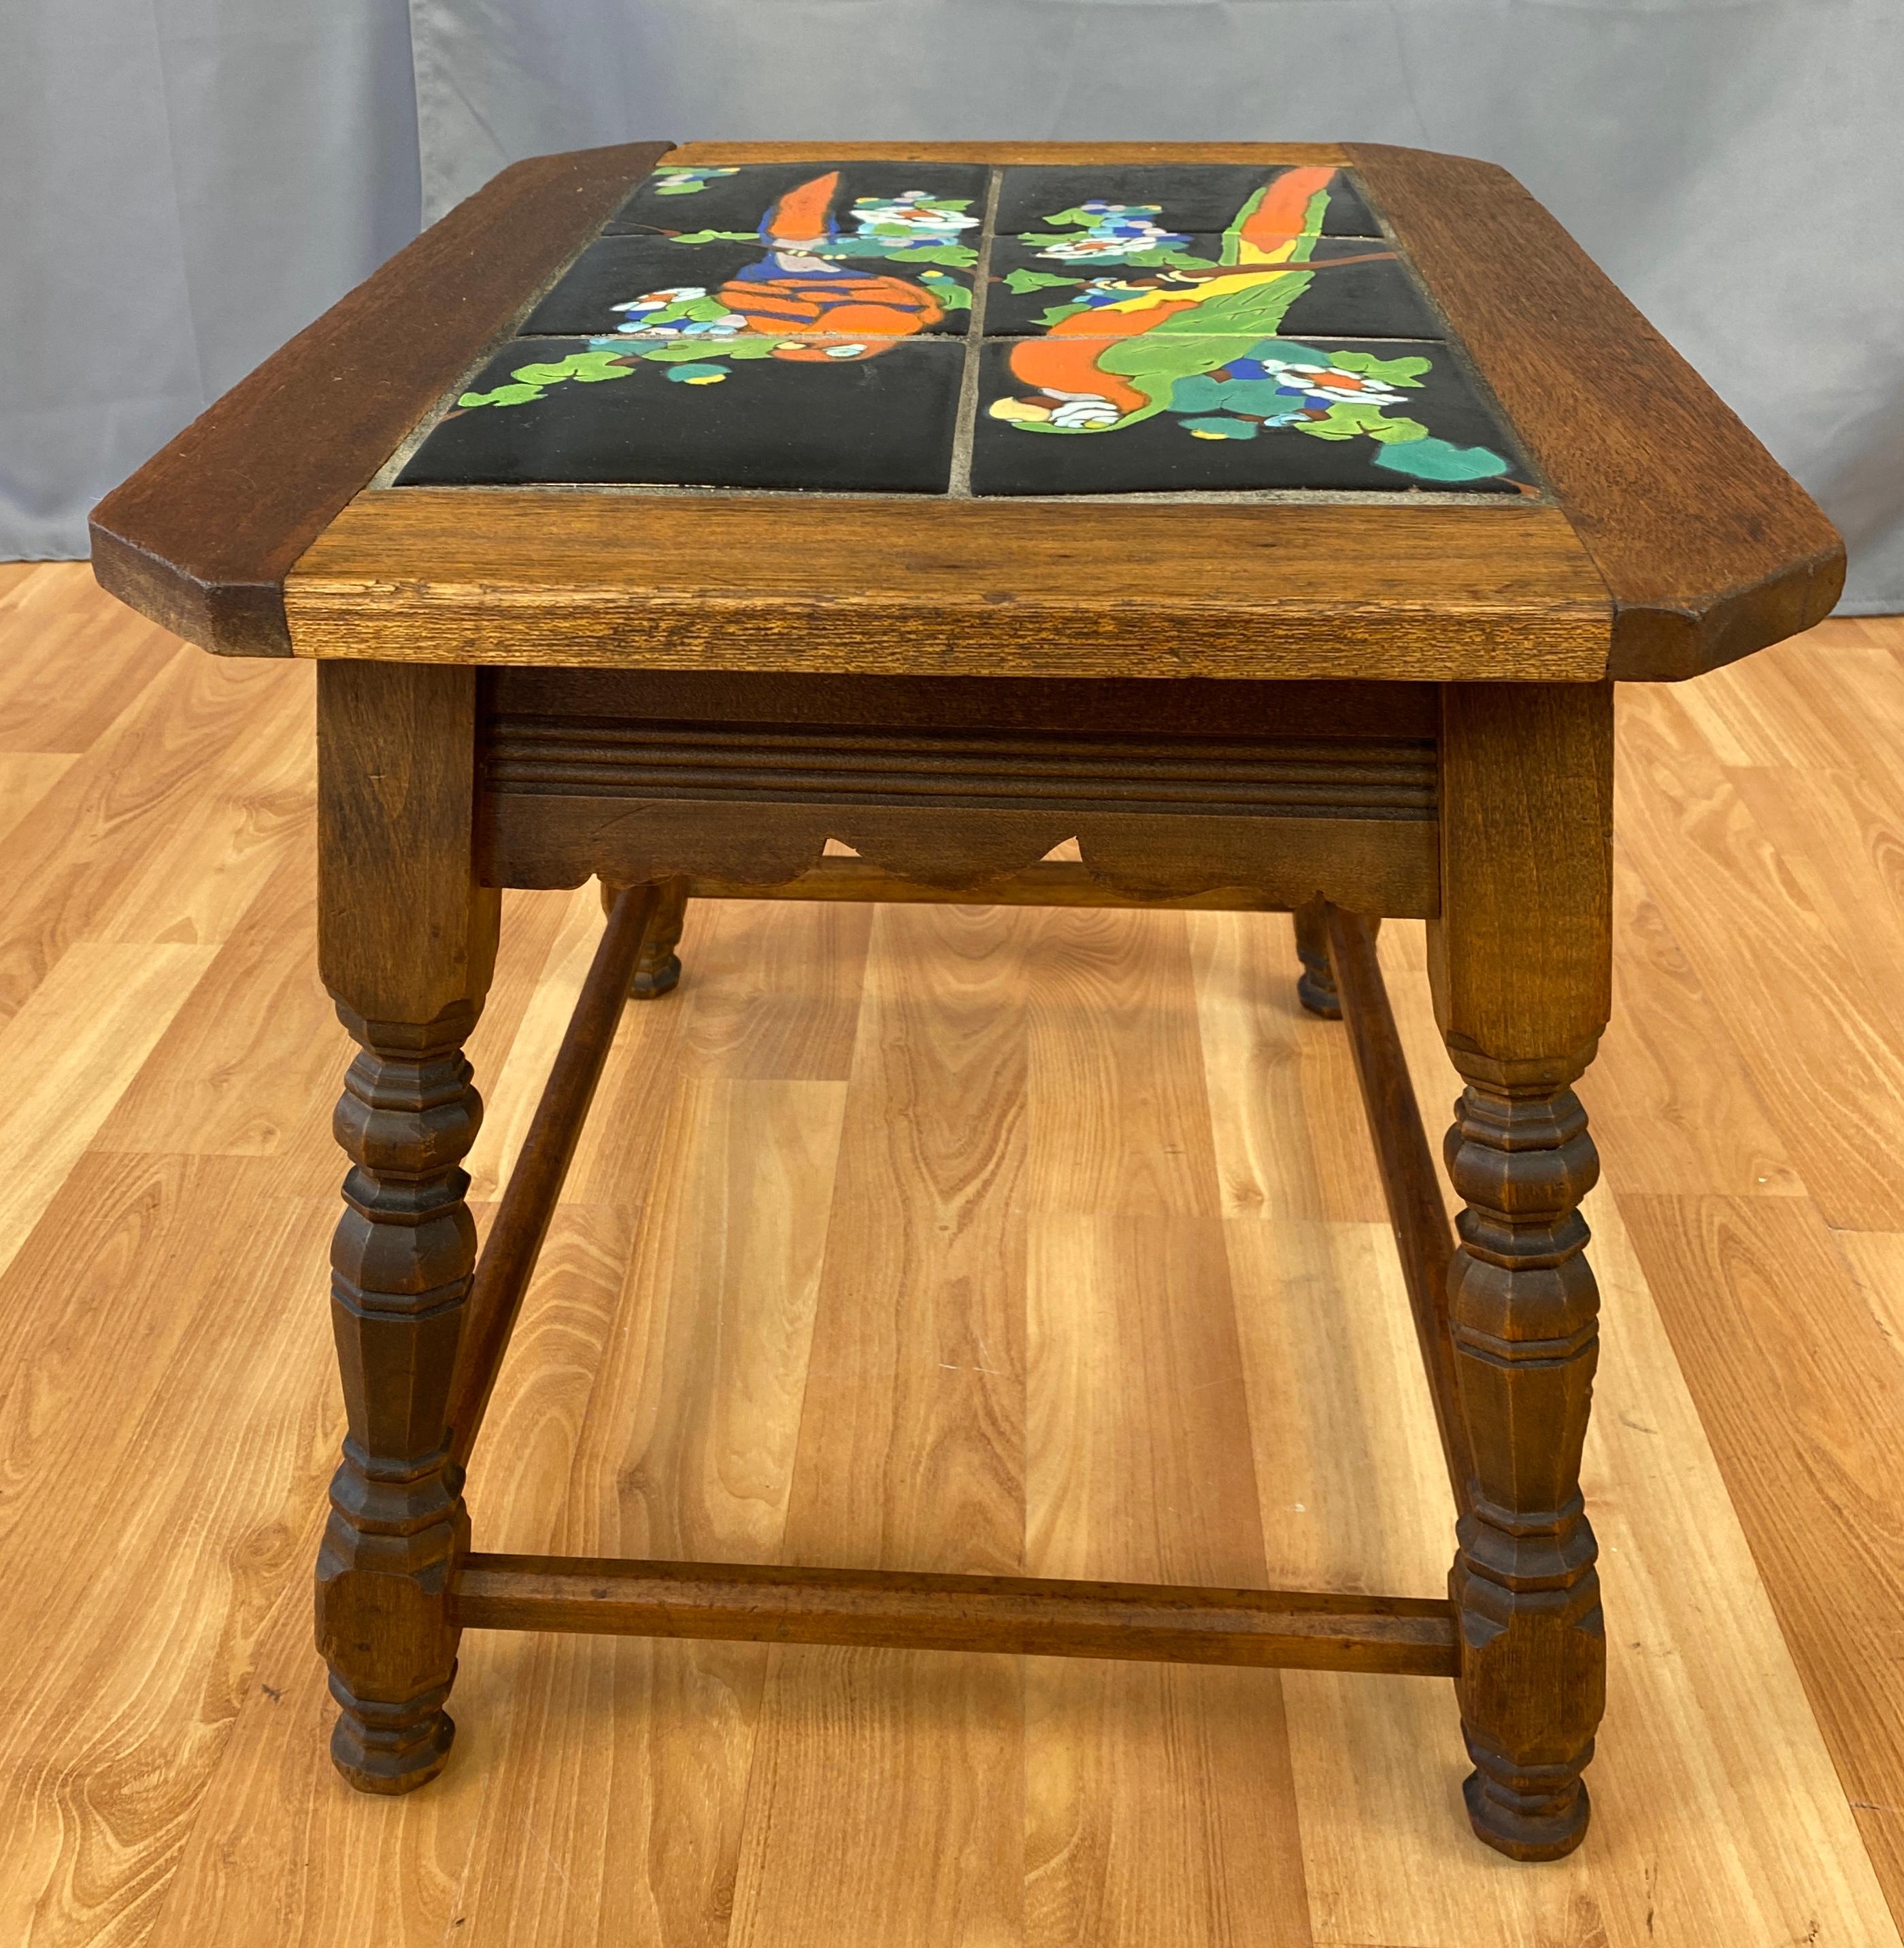 American 1920s-1930s Catalina Tile Mission Table with Parrots